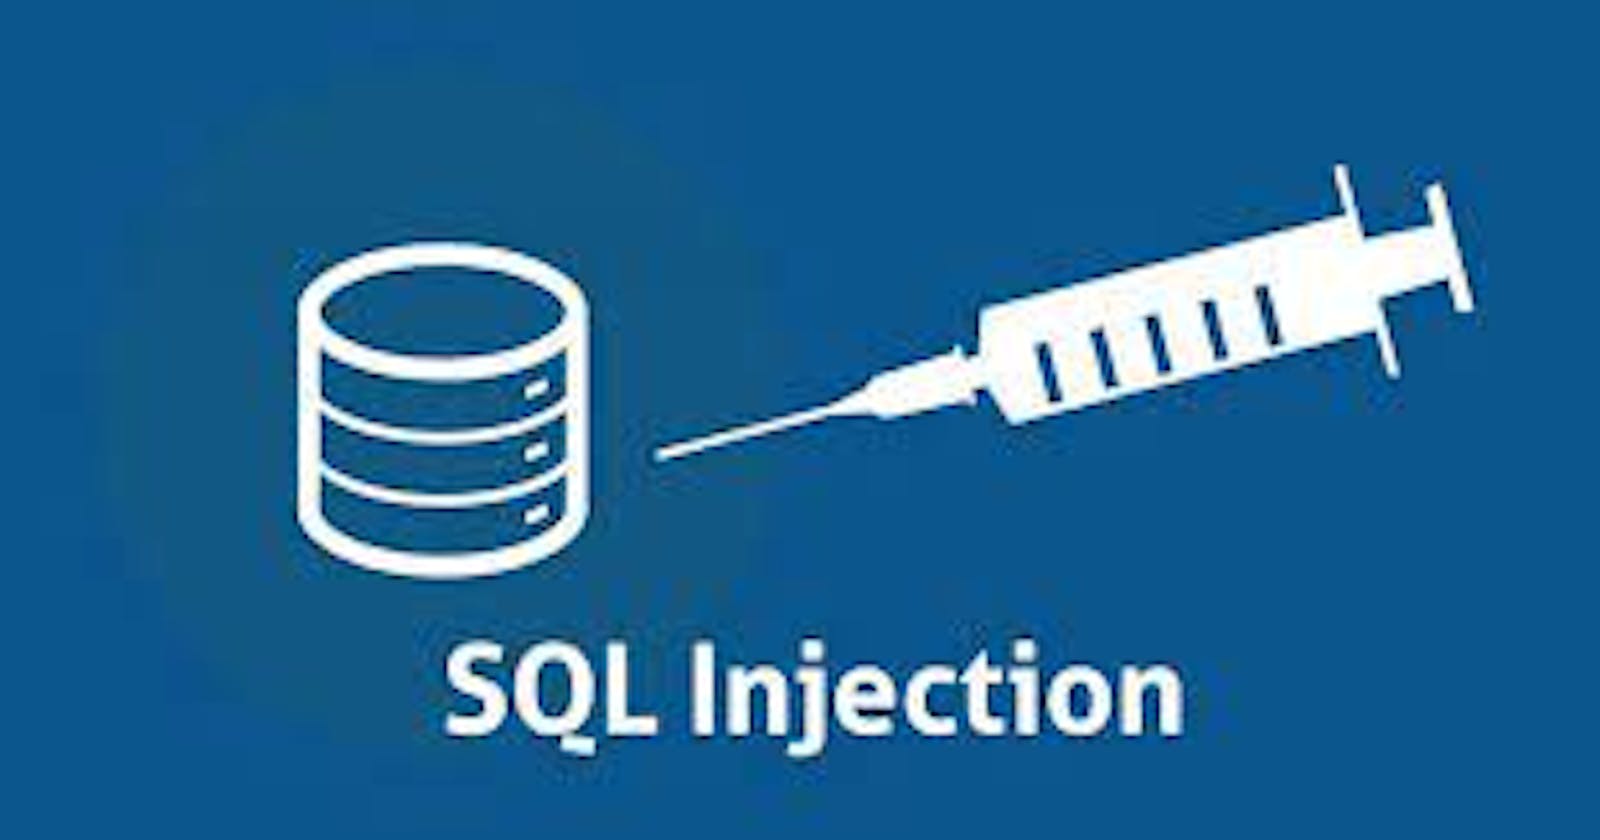 What are SQL injections?